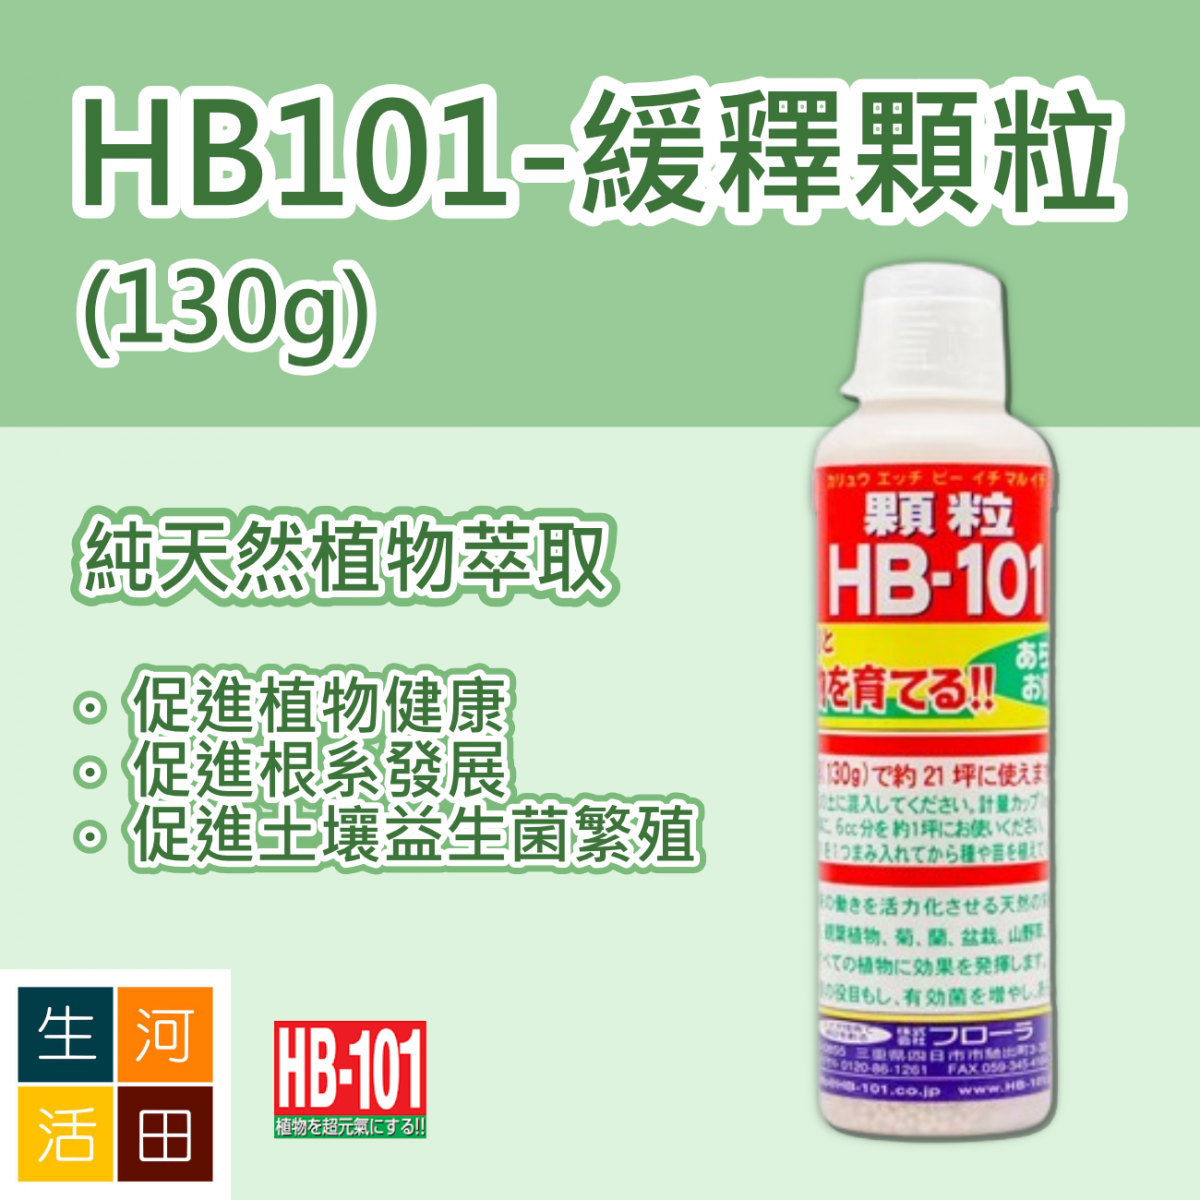 HB101 Phytogen Sustained Release Granules(130g)|Healthy growth plants|Improve soil|Parallel import